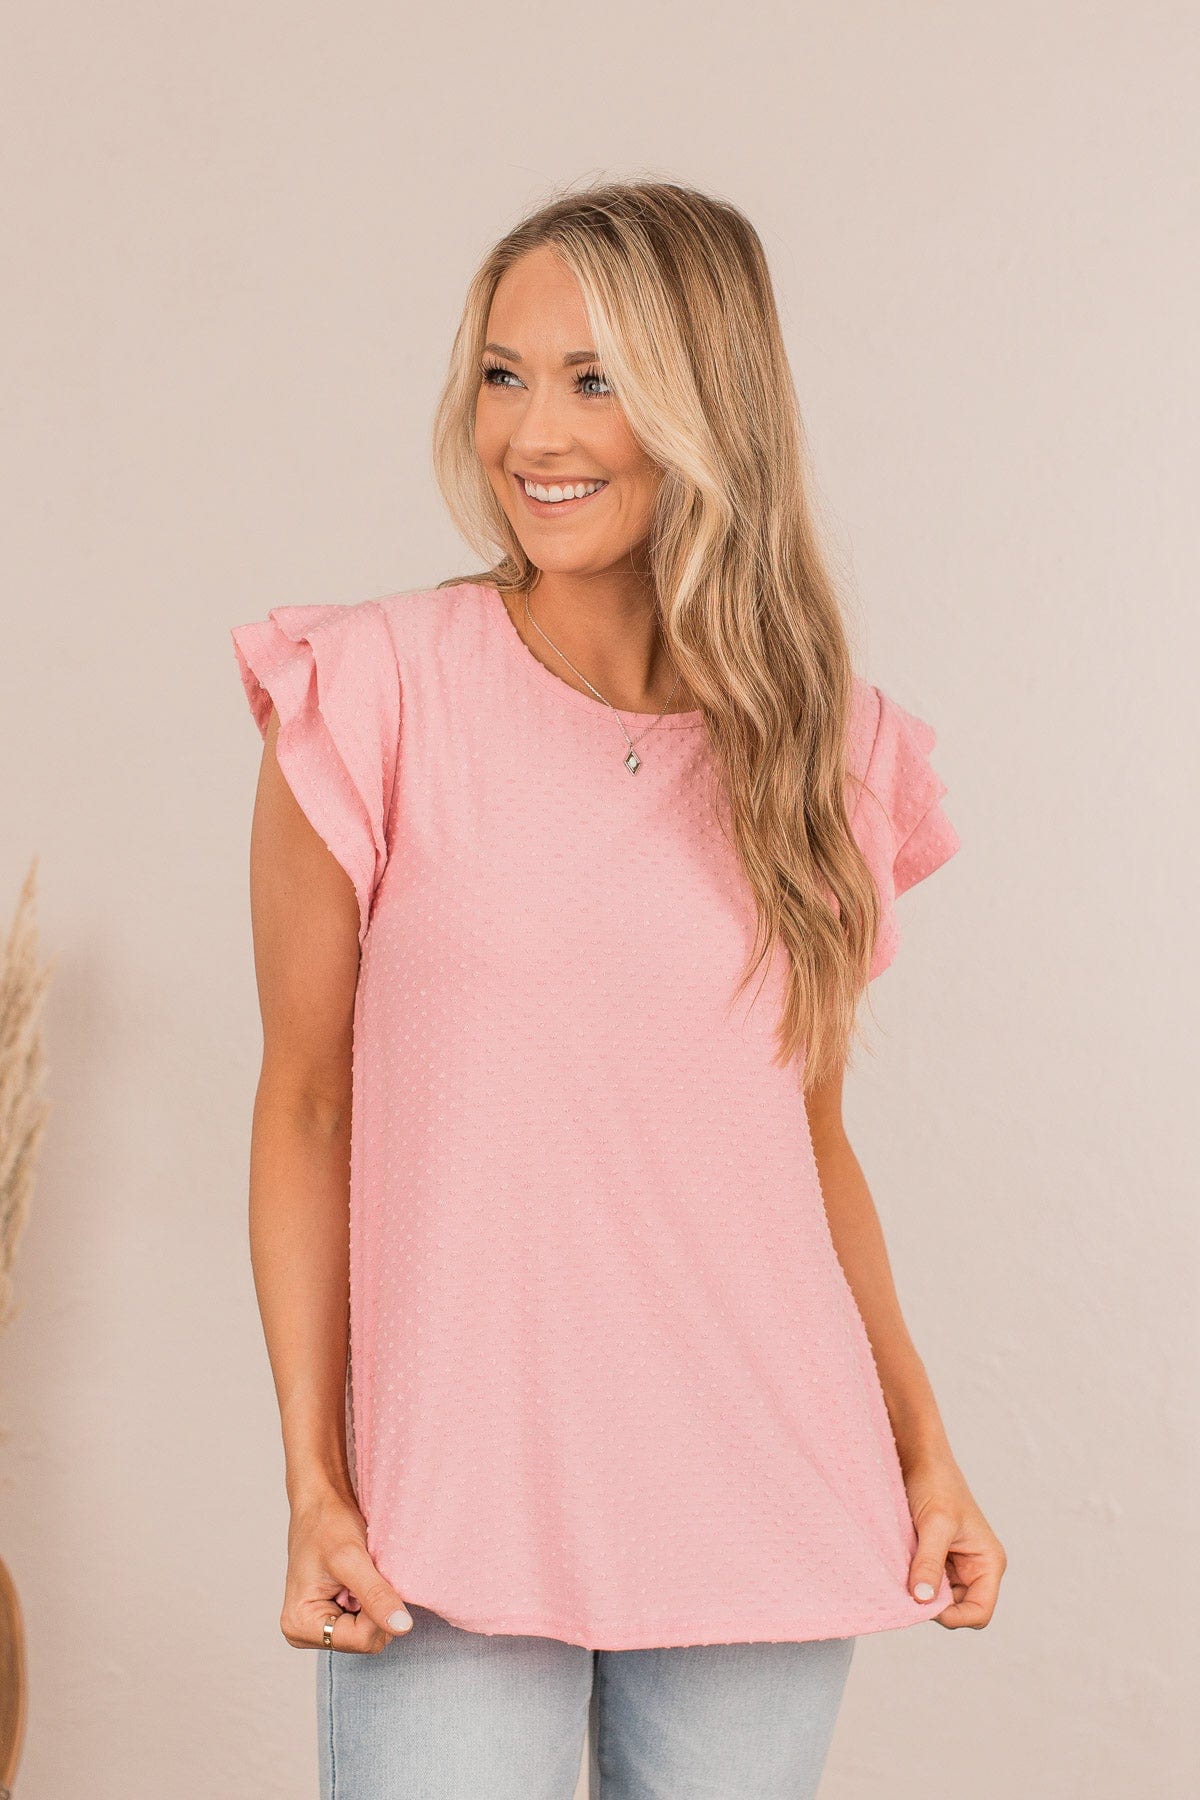 Comfortable In My Own Skin Top- Pink